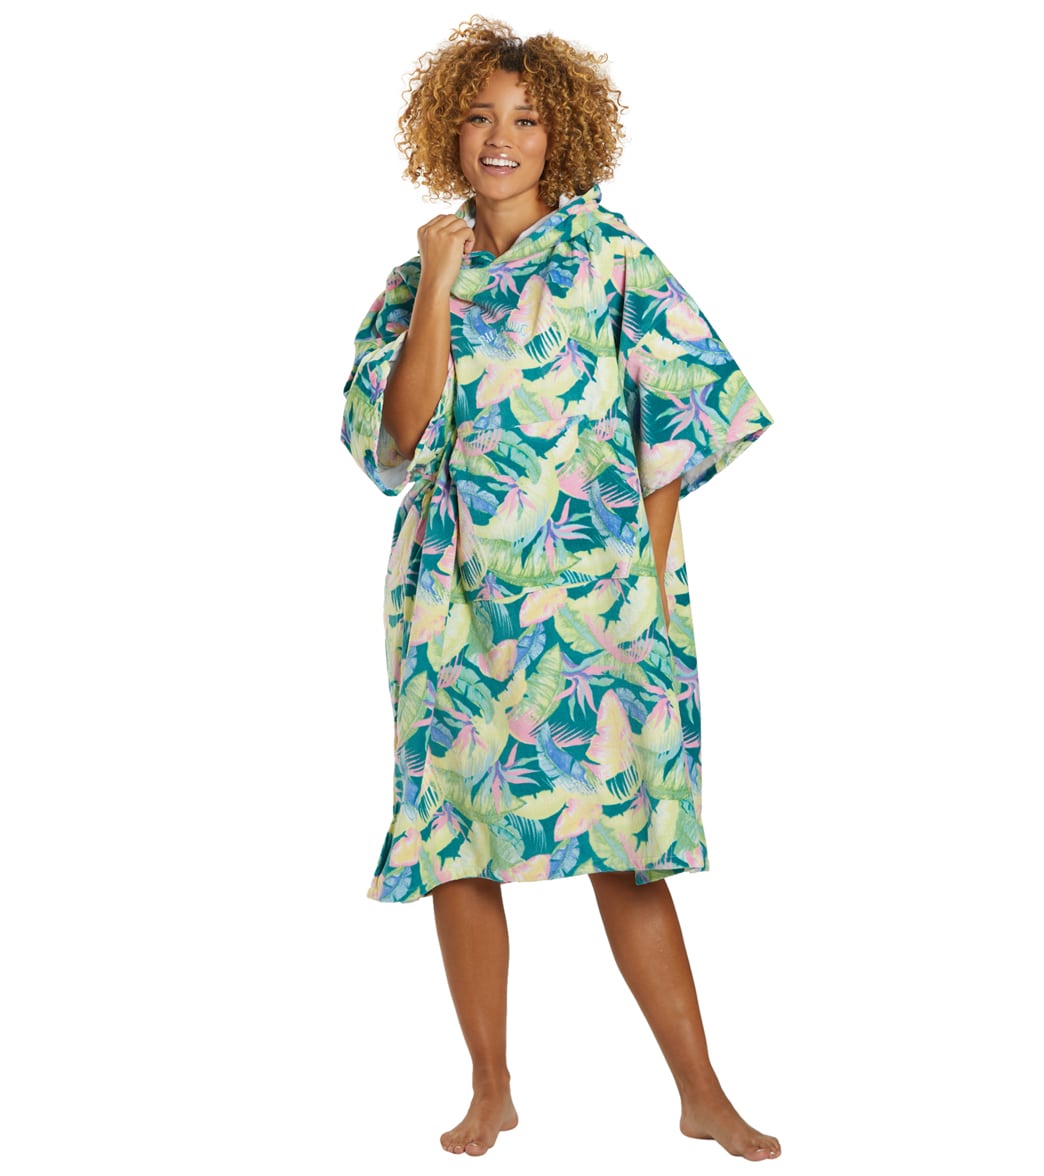 Billabong Women's Hooded Changing Poncho at SwimOutlet.com